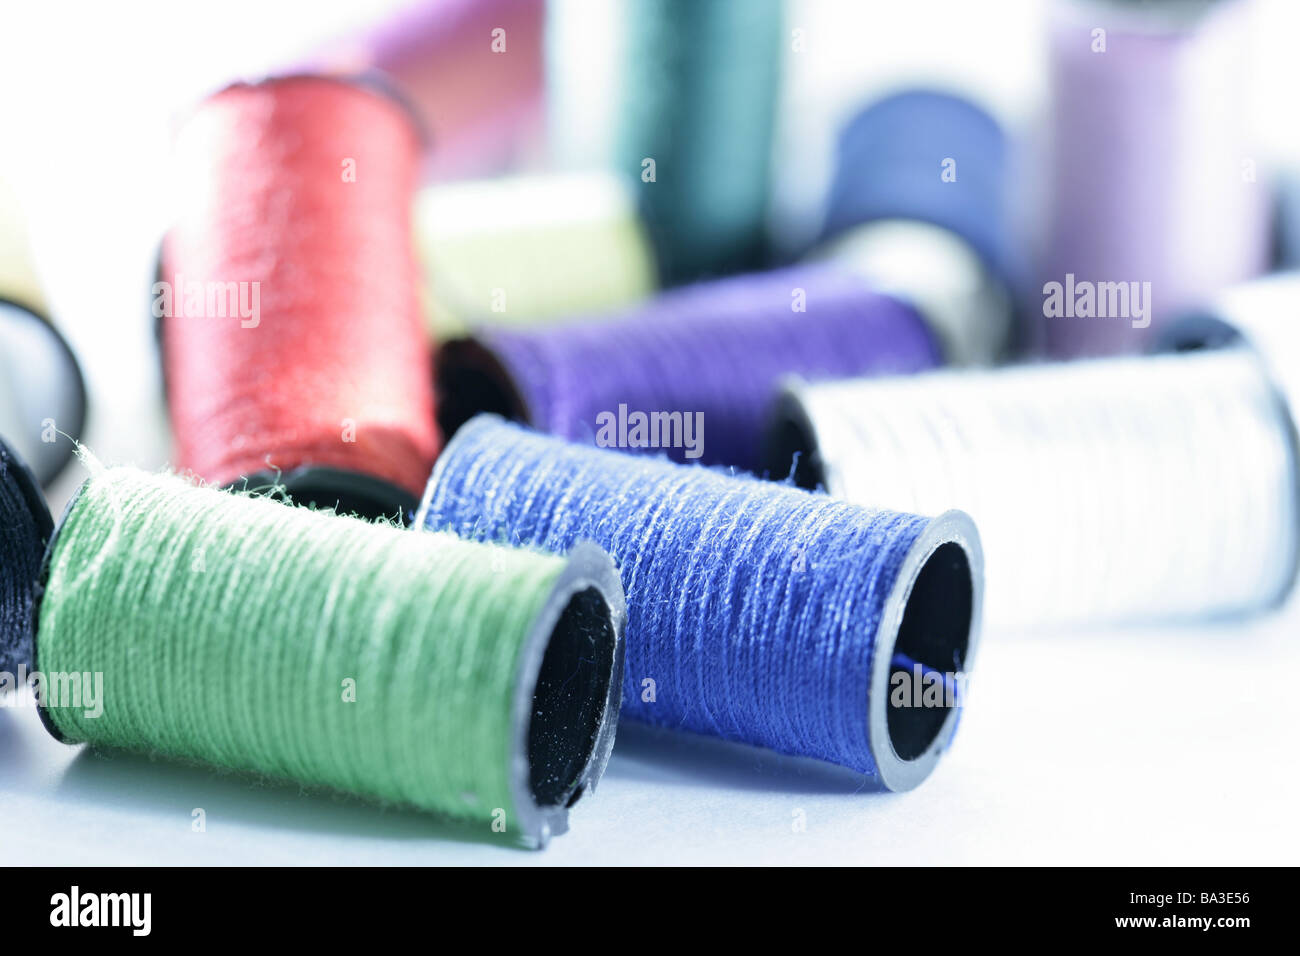 Spools colorfully in confusion Nähmaterial Nähutensilien Nähgarn yarn threads Nähfäden roles spools thread-roles rolled up Stock Photo